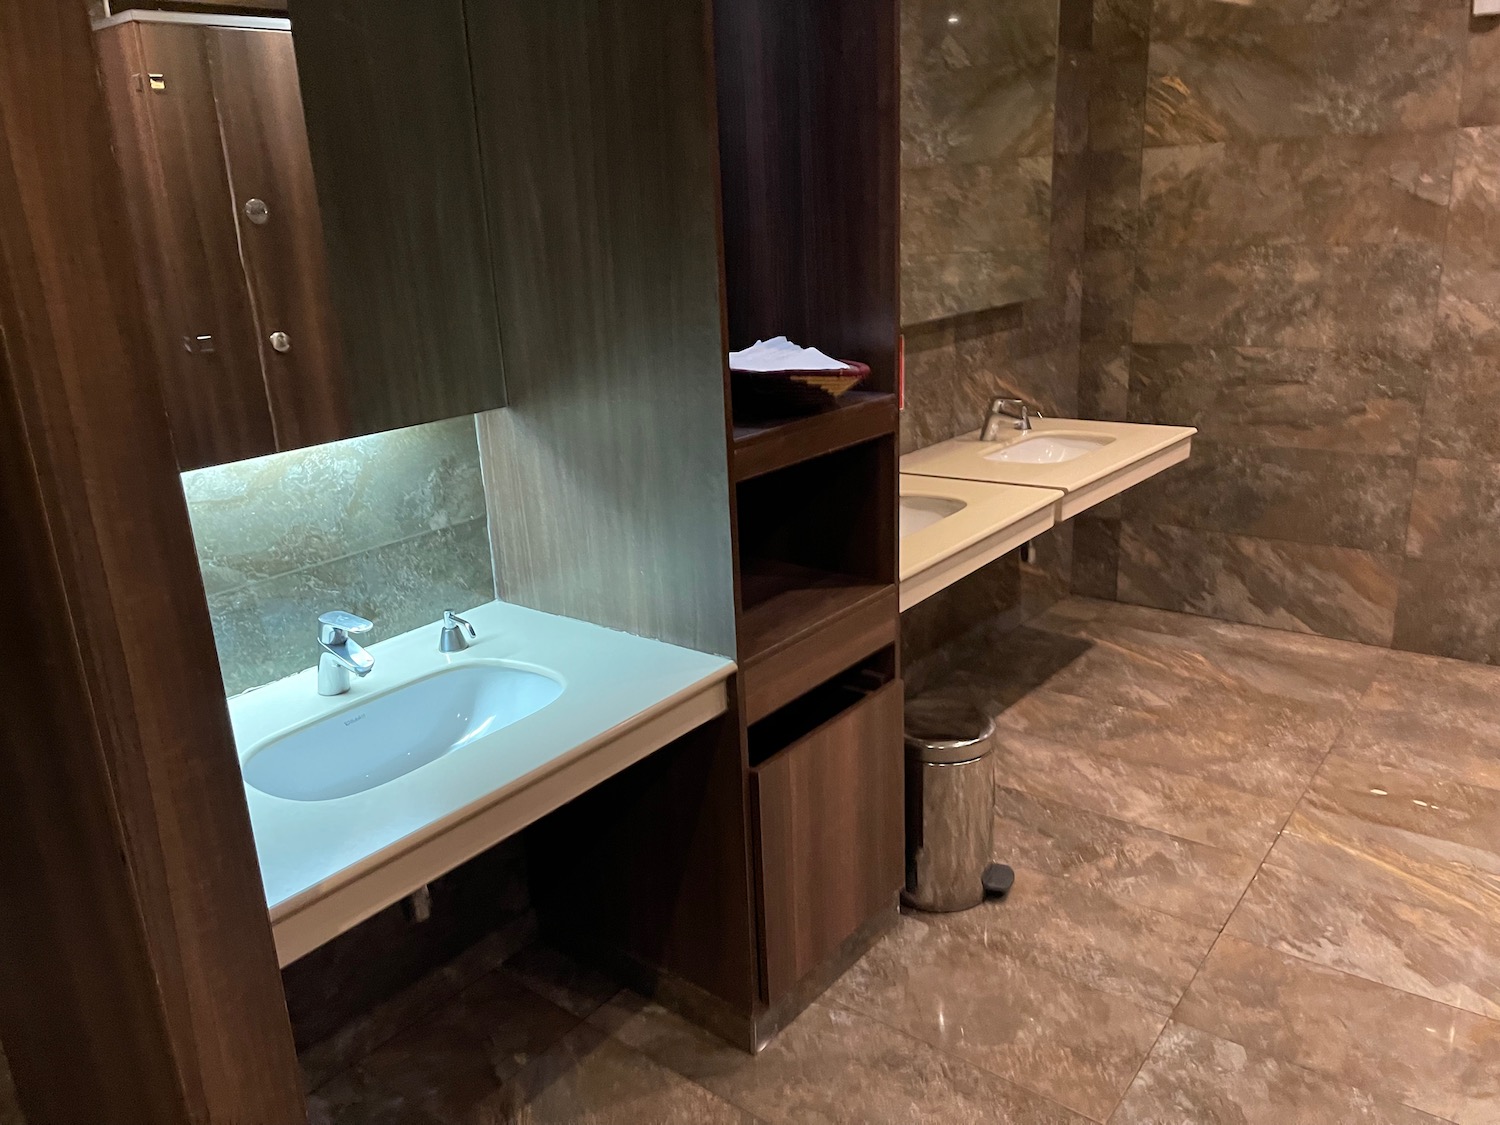 a bathroom with sinks and cabinets